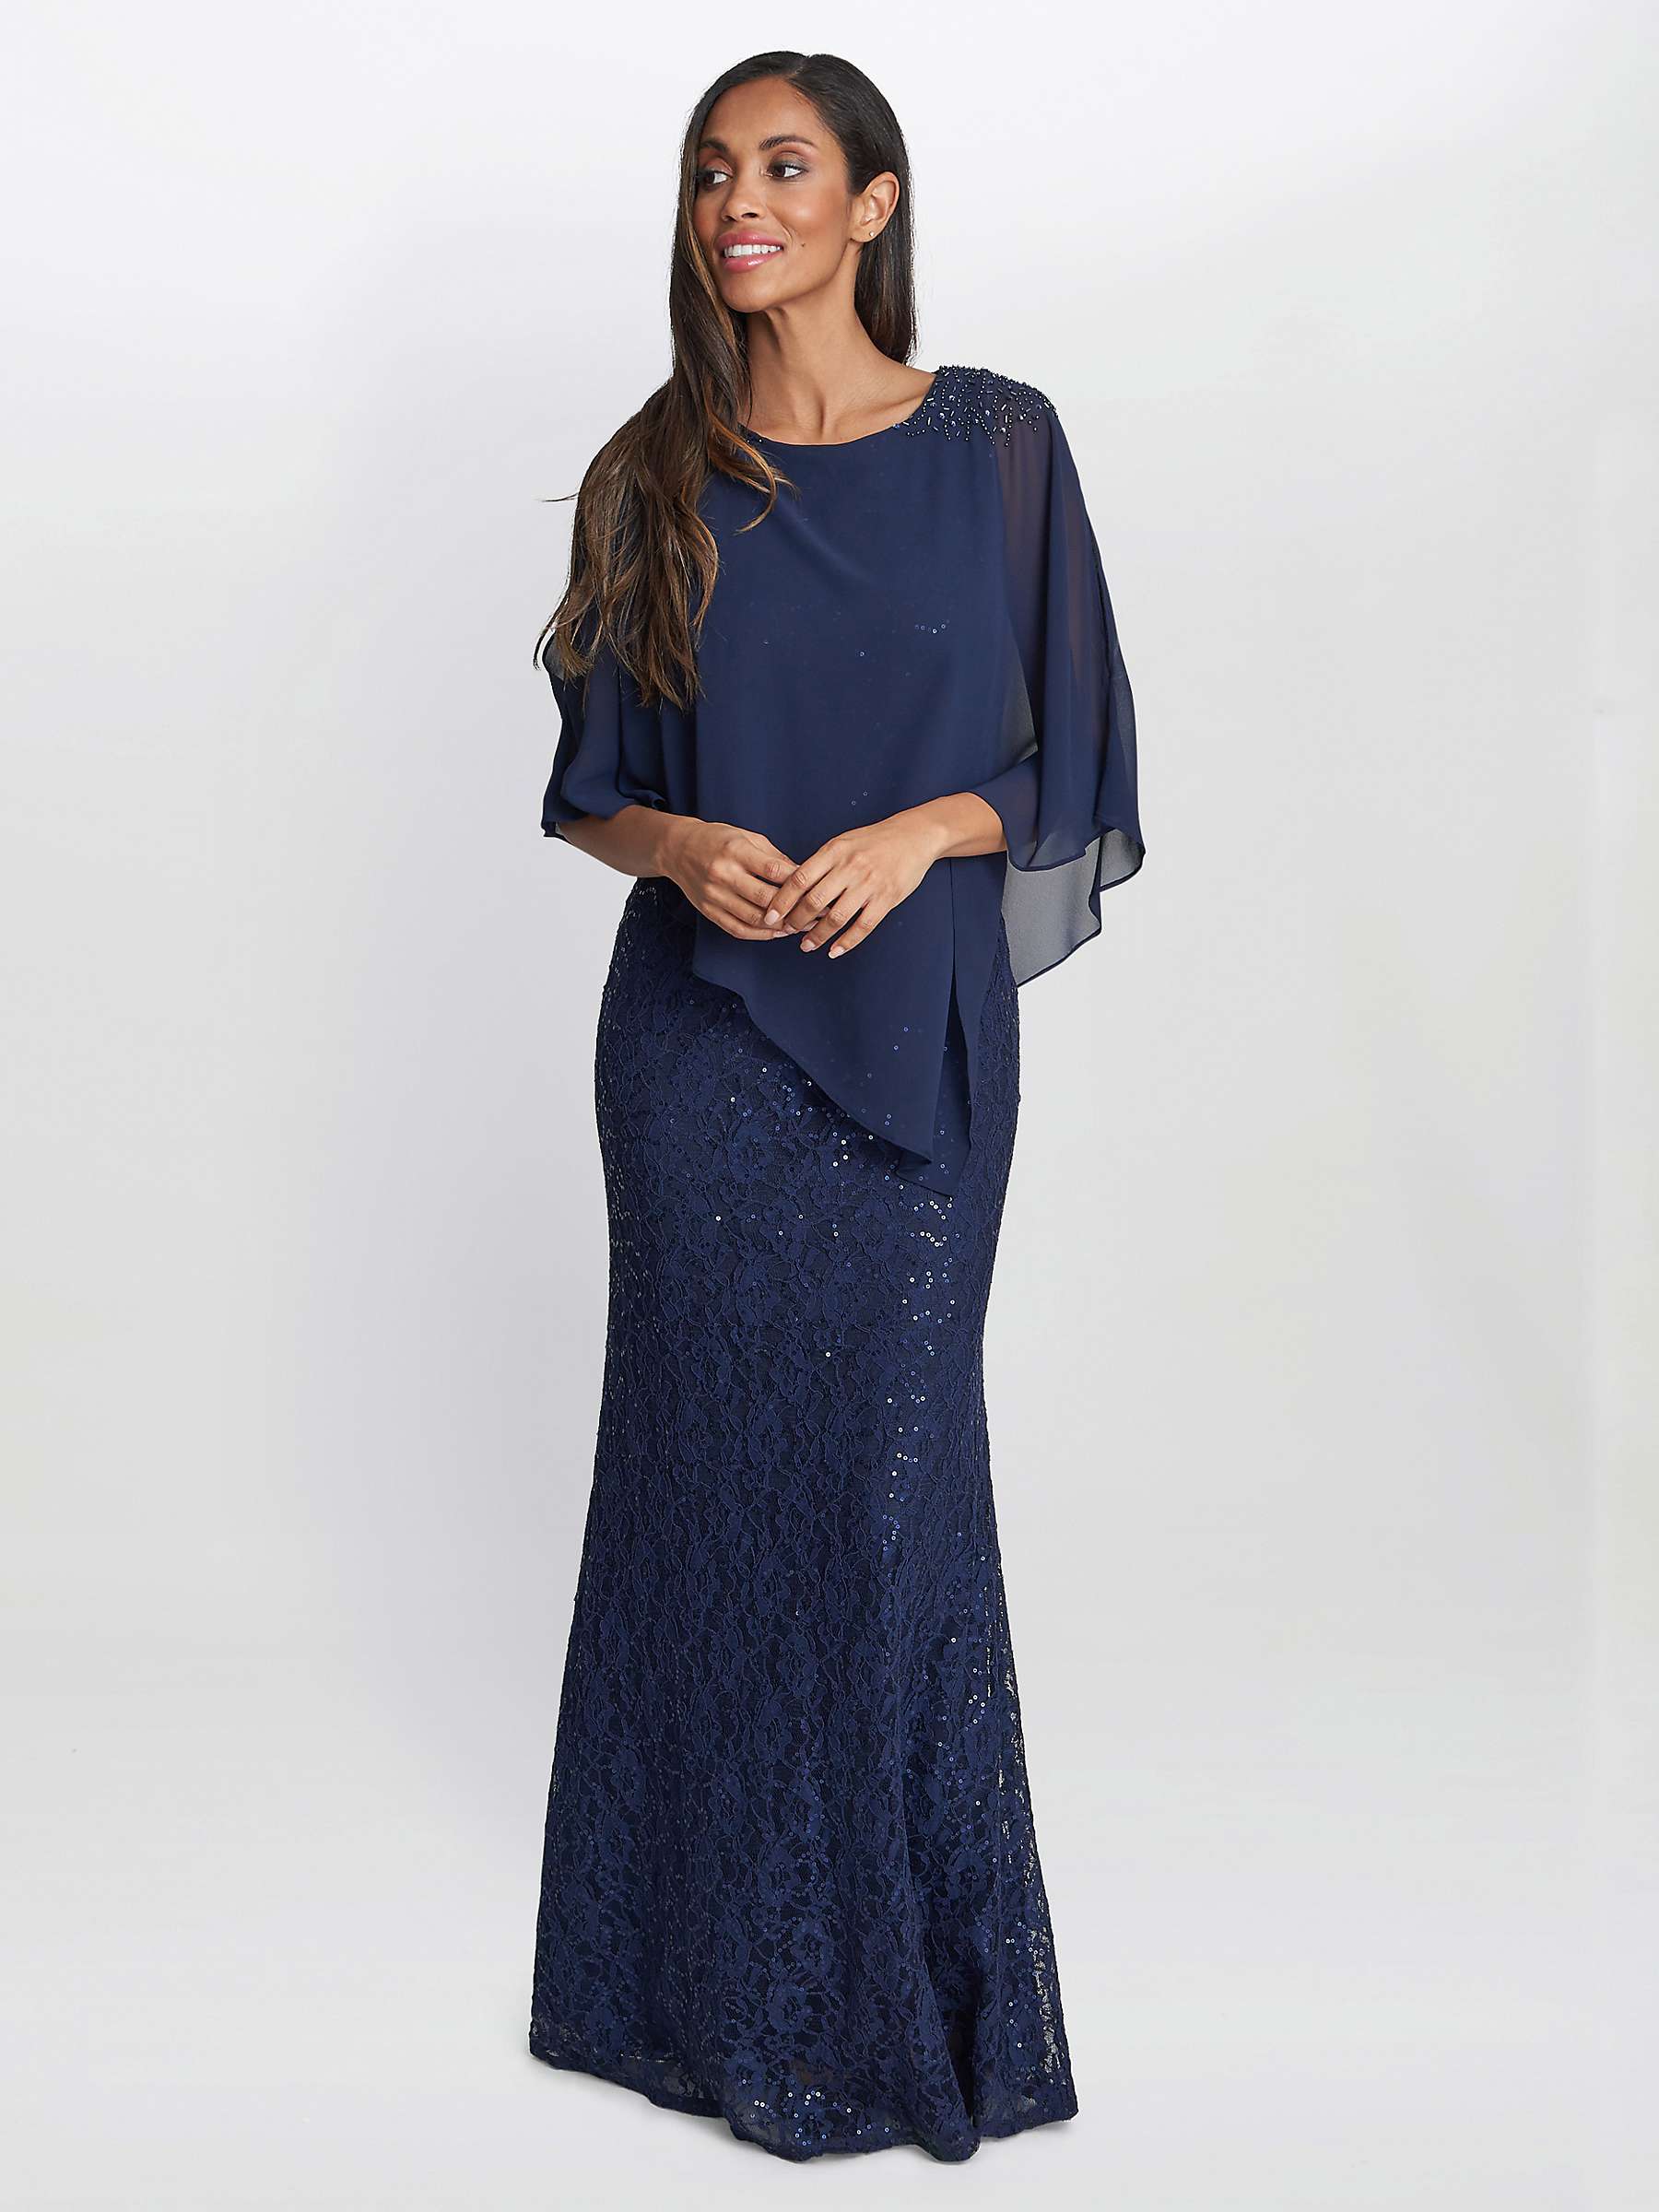 Buy Gina Bacconi Ginger Sequin Lace Dress with Chiffon Cape, Spring Navy Online at johnlewis.com